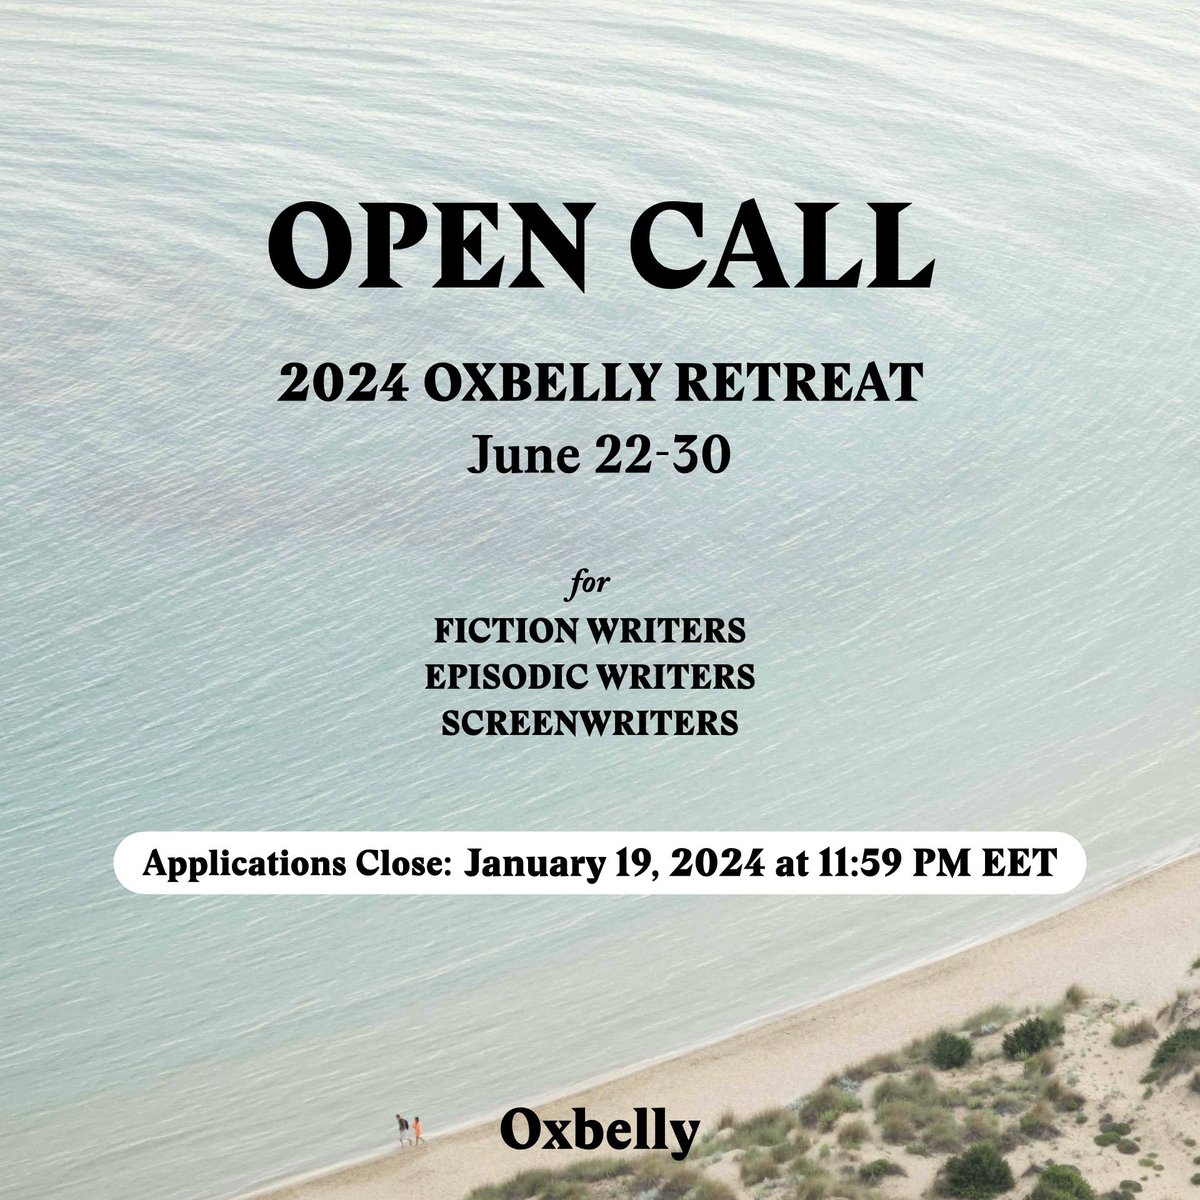 Applications for the 2024 Oxbelly Retreat, inclusive of the Fiction Writers, Episodic Writers, and Screenwriters programs, are now open for Greek and international applicants. The program has no cost to apply and all expenses for fellows are covered oxbelly.com